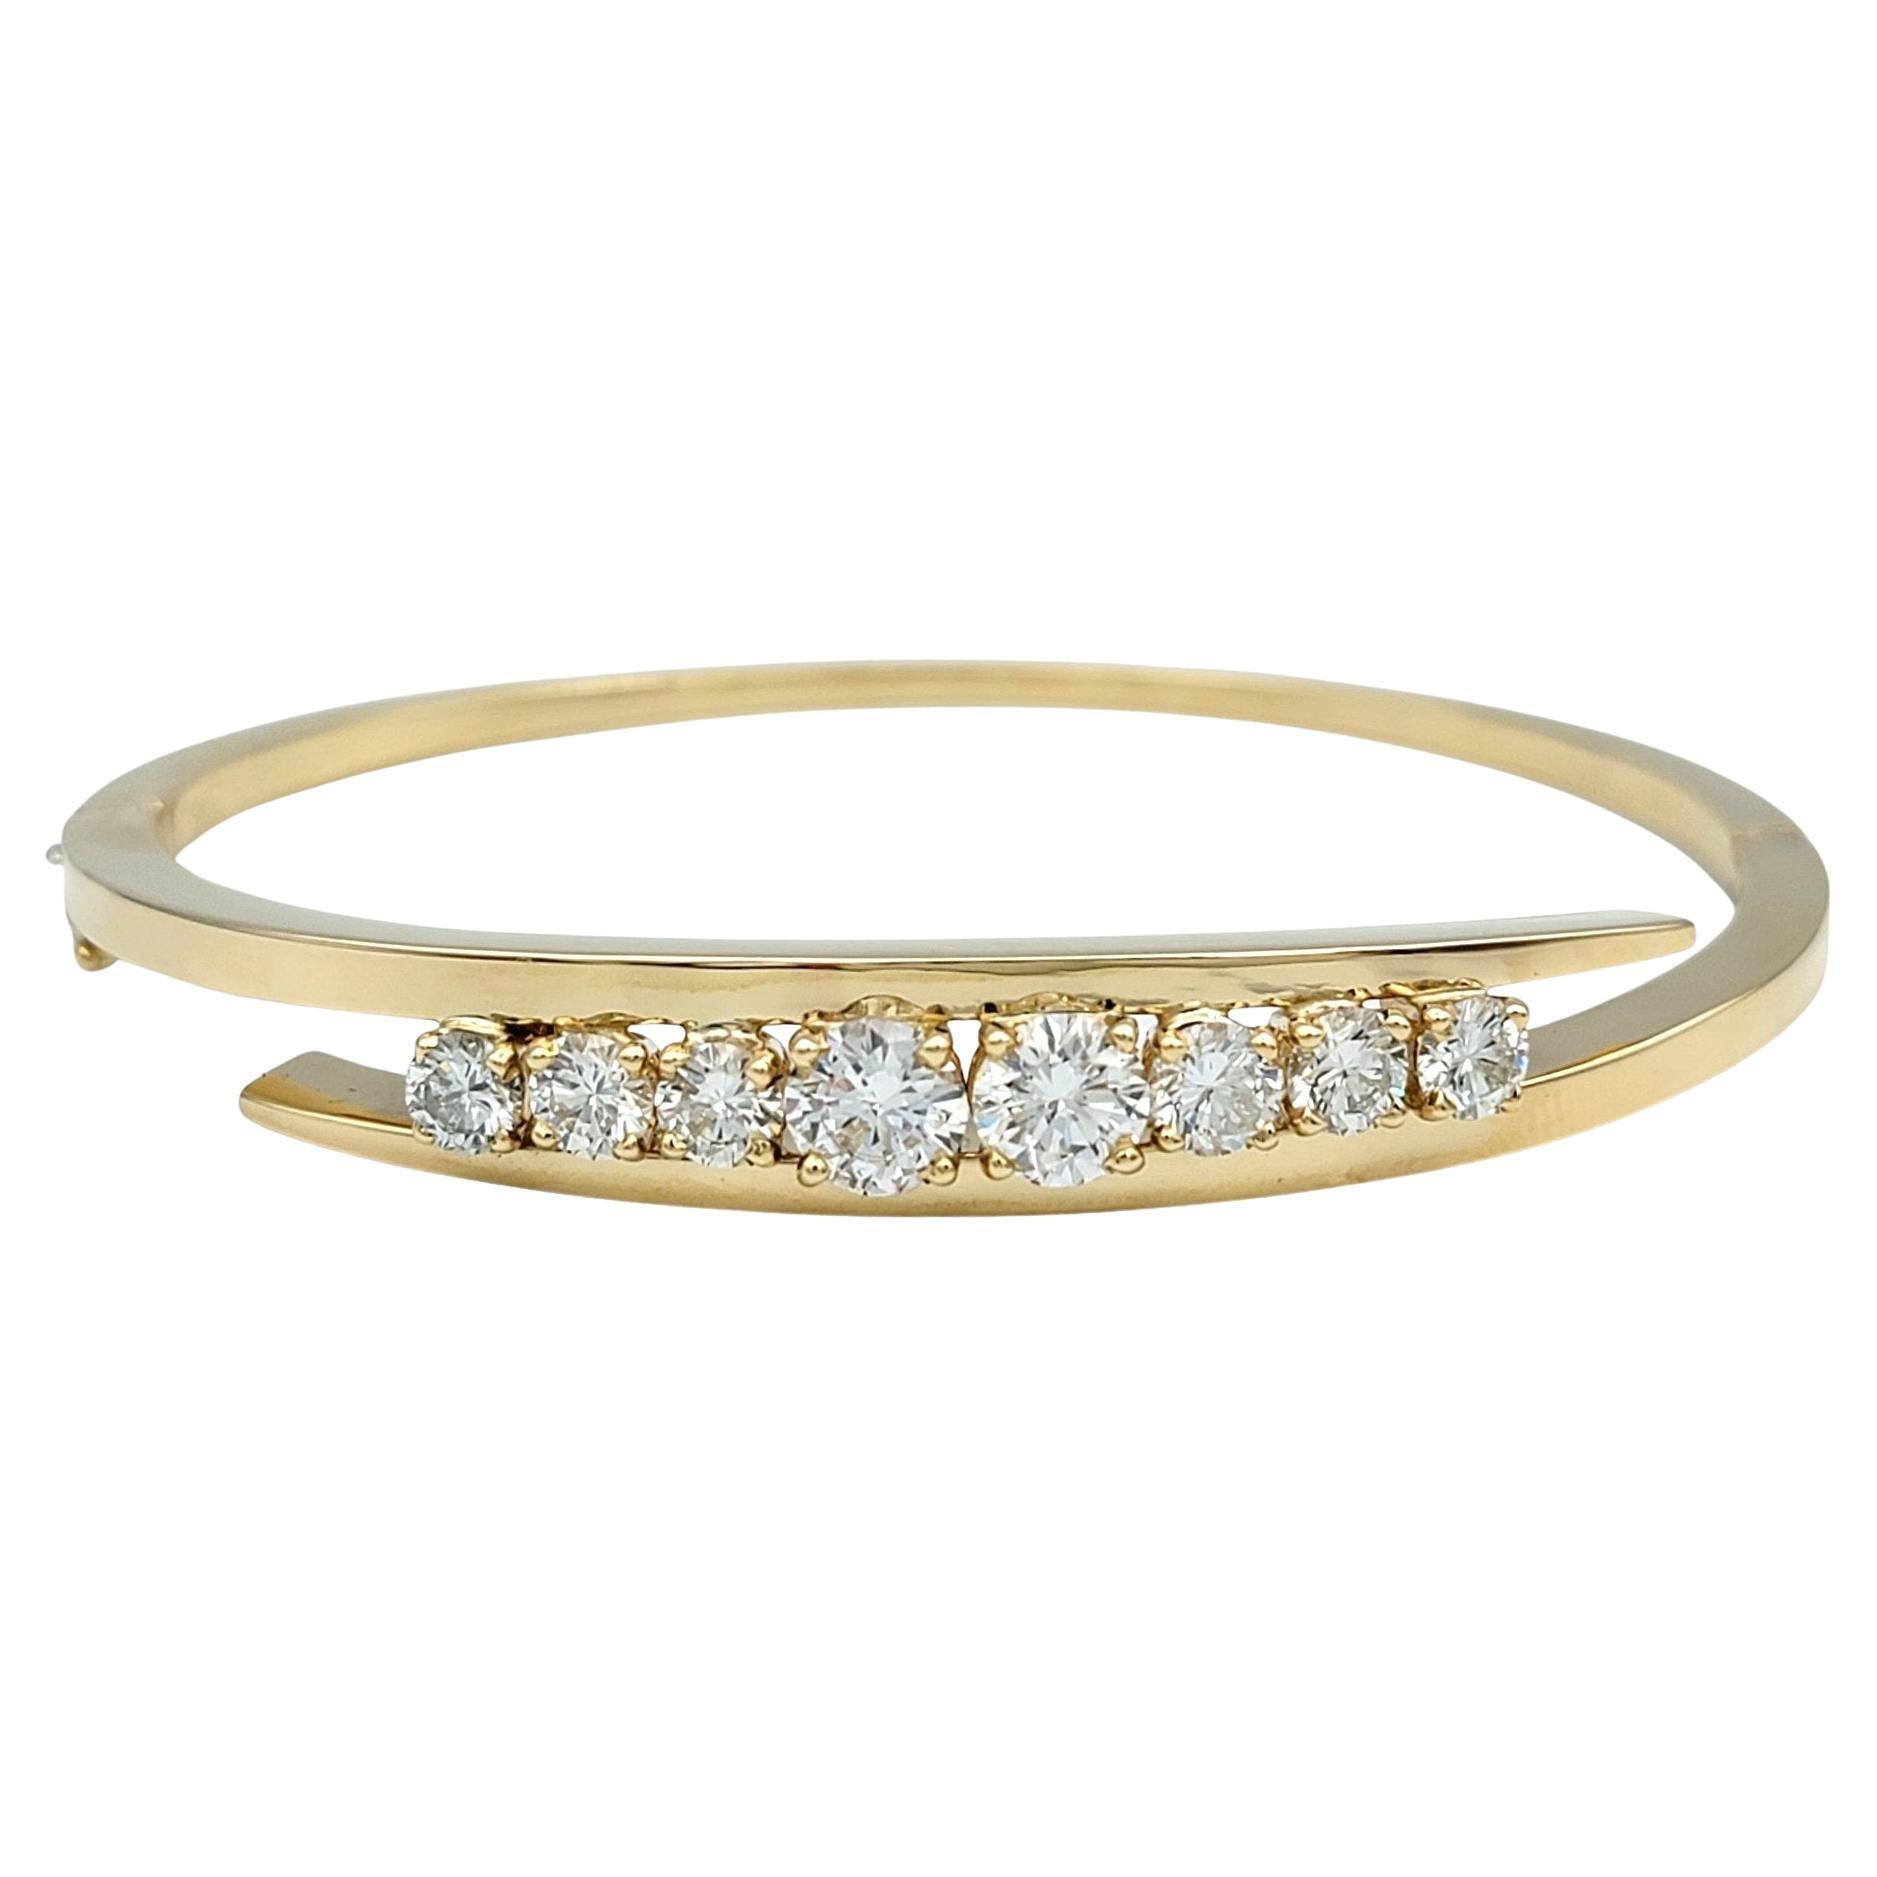 Round Diamond Bypass Style Hinged Bangle Bracelet Set in 14 Karat Yellow Gold For Sale